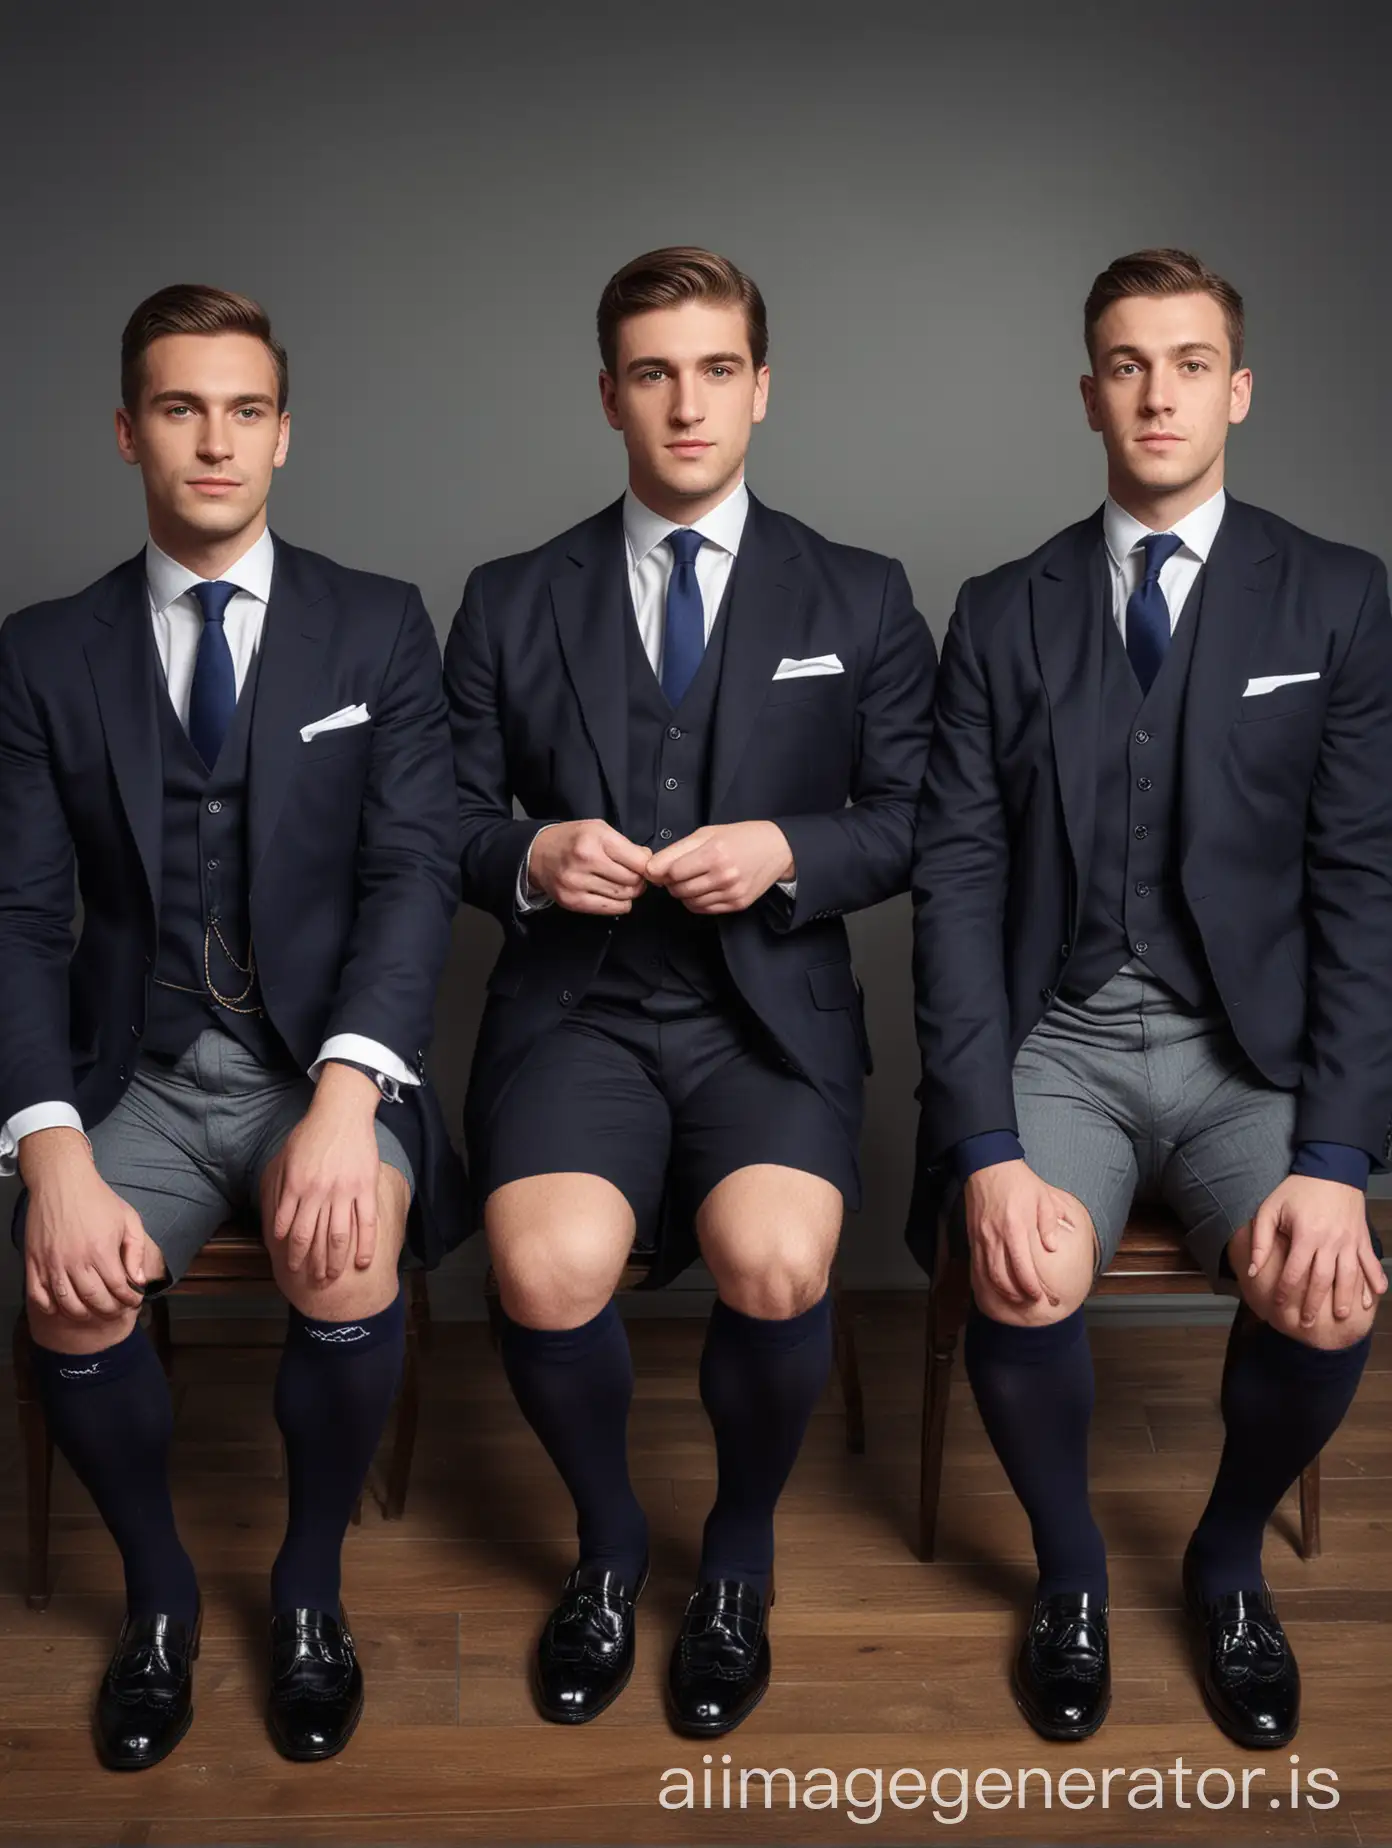 Please create the image of 3 handsome mascular English bankers sitting in london office wearing black loafer with navy socks.
